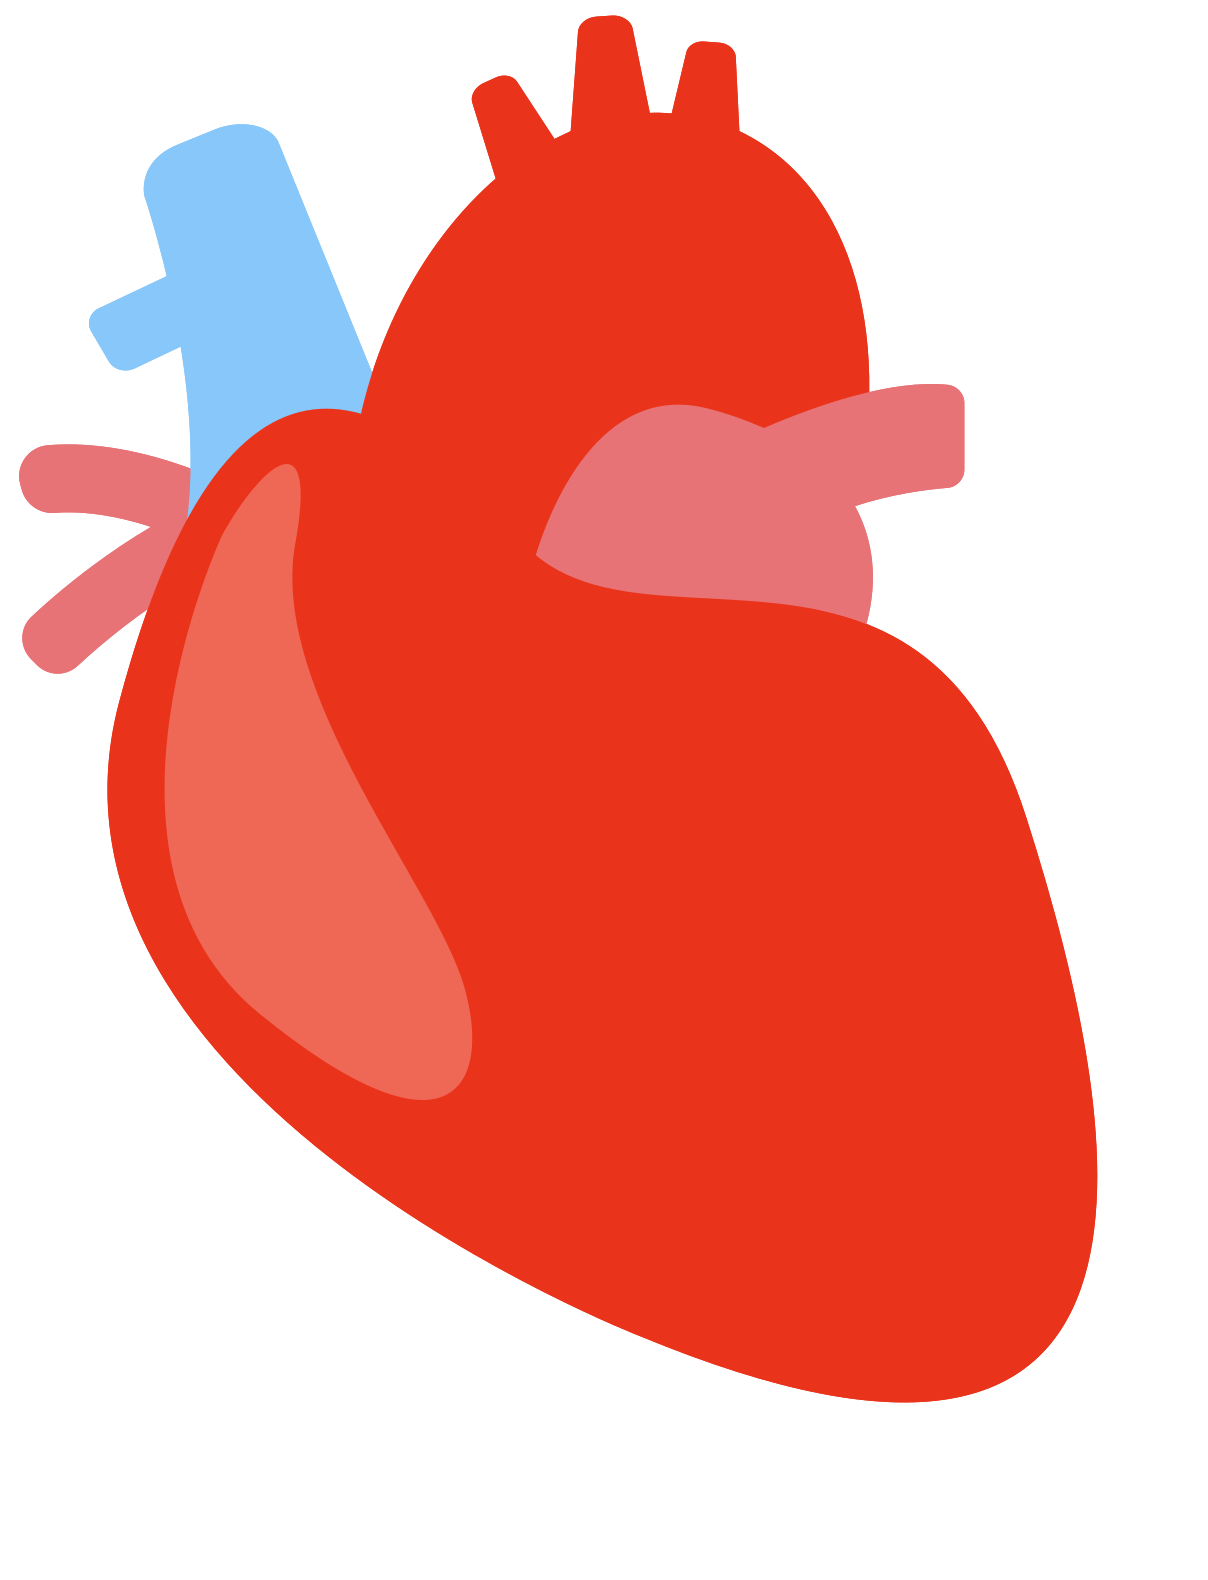 Human Heart Png Free Images With Transparent Background 1320 Free